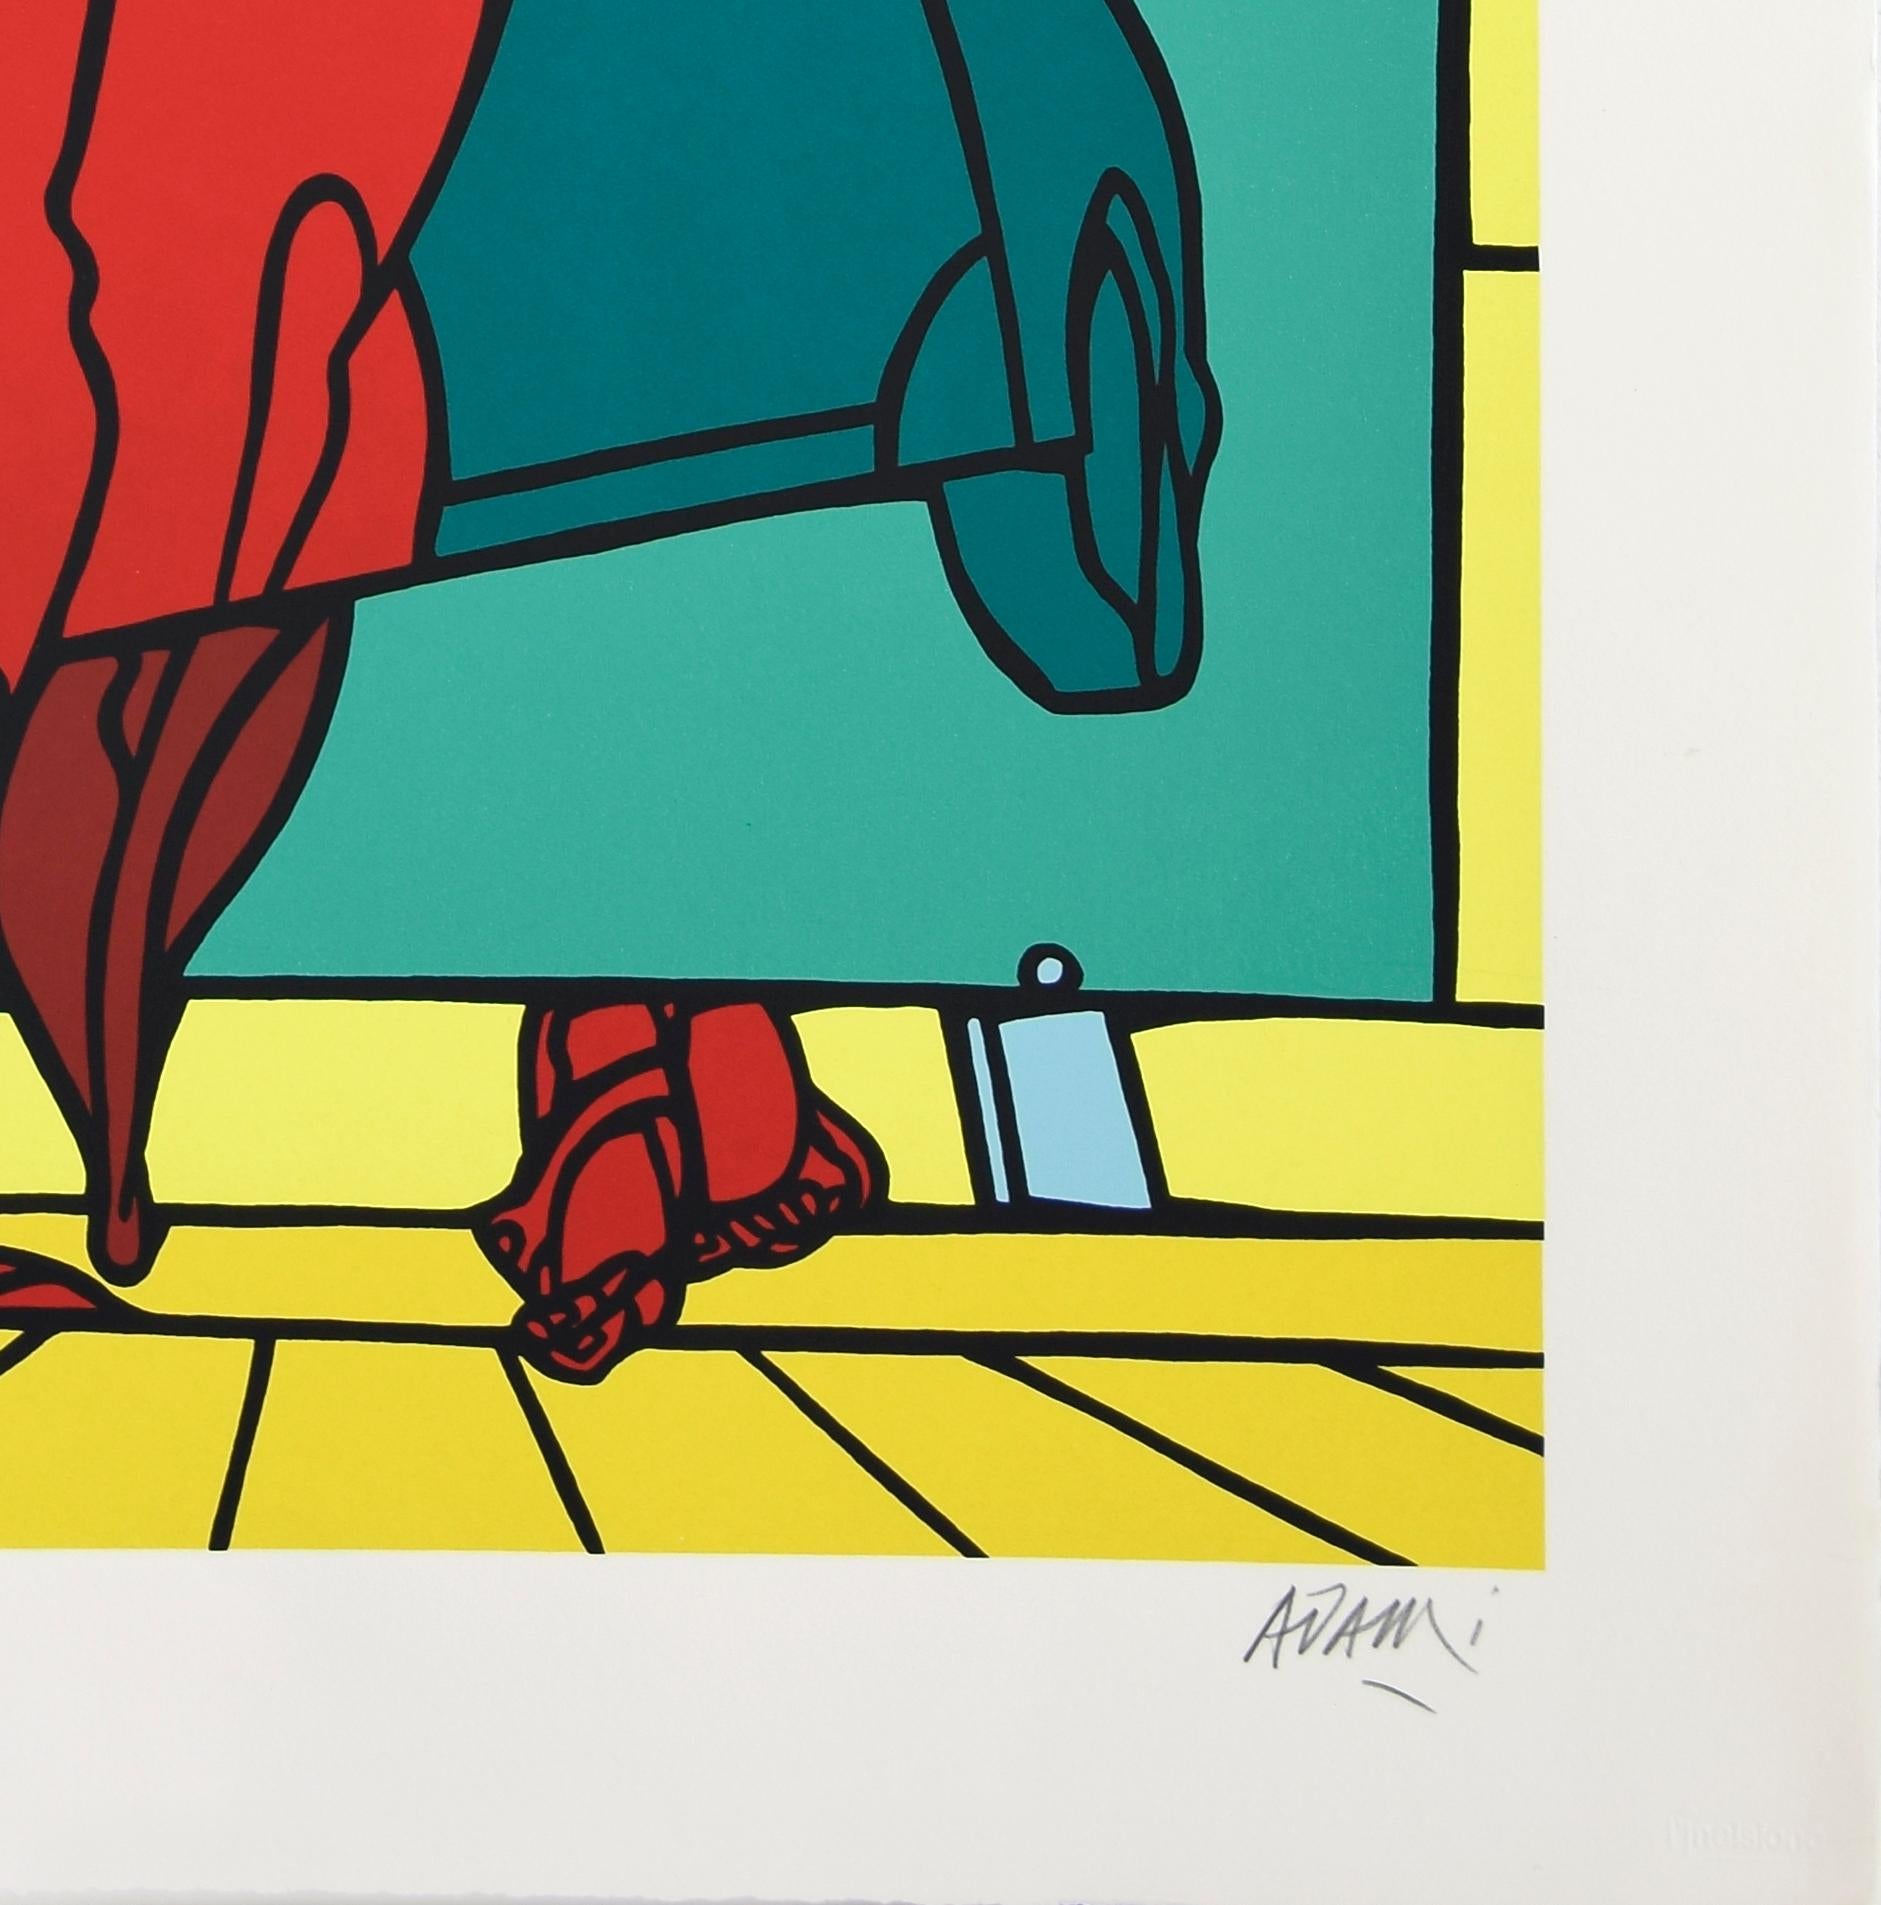 Untitled is an original artwork realized by Valerio Adami in 1996.

Serigraph on paper. Hand-signed and numbered on the lower margin. Artist's proof (P.A.).

Dimensions: cm 90 x 70. In very good conditions.

Colorful composition representing a red